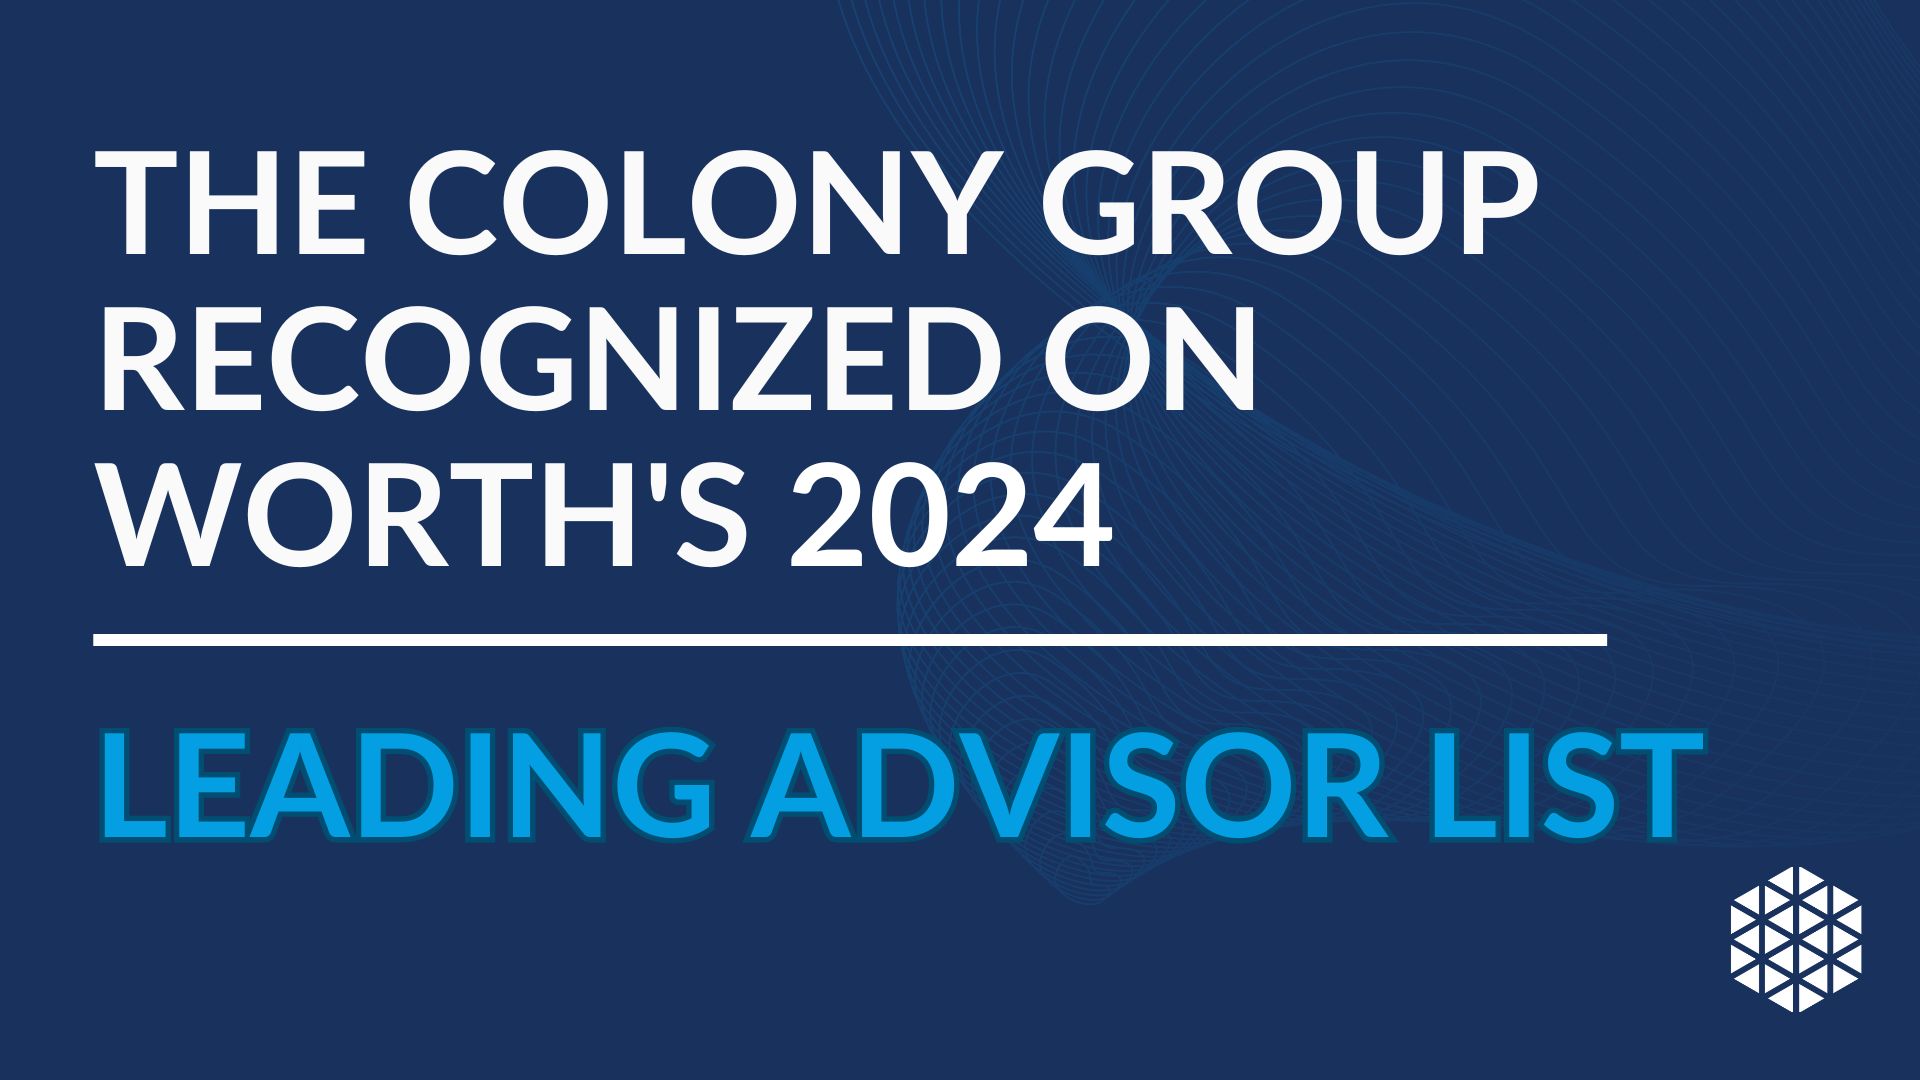 The Colony Group Recognized on Worth's 2024 Leading Advisor List